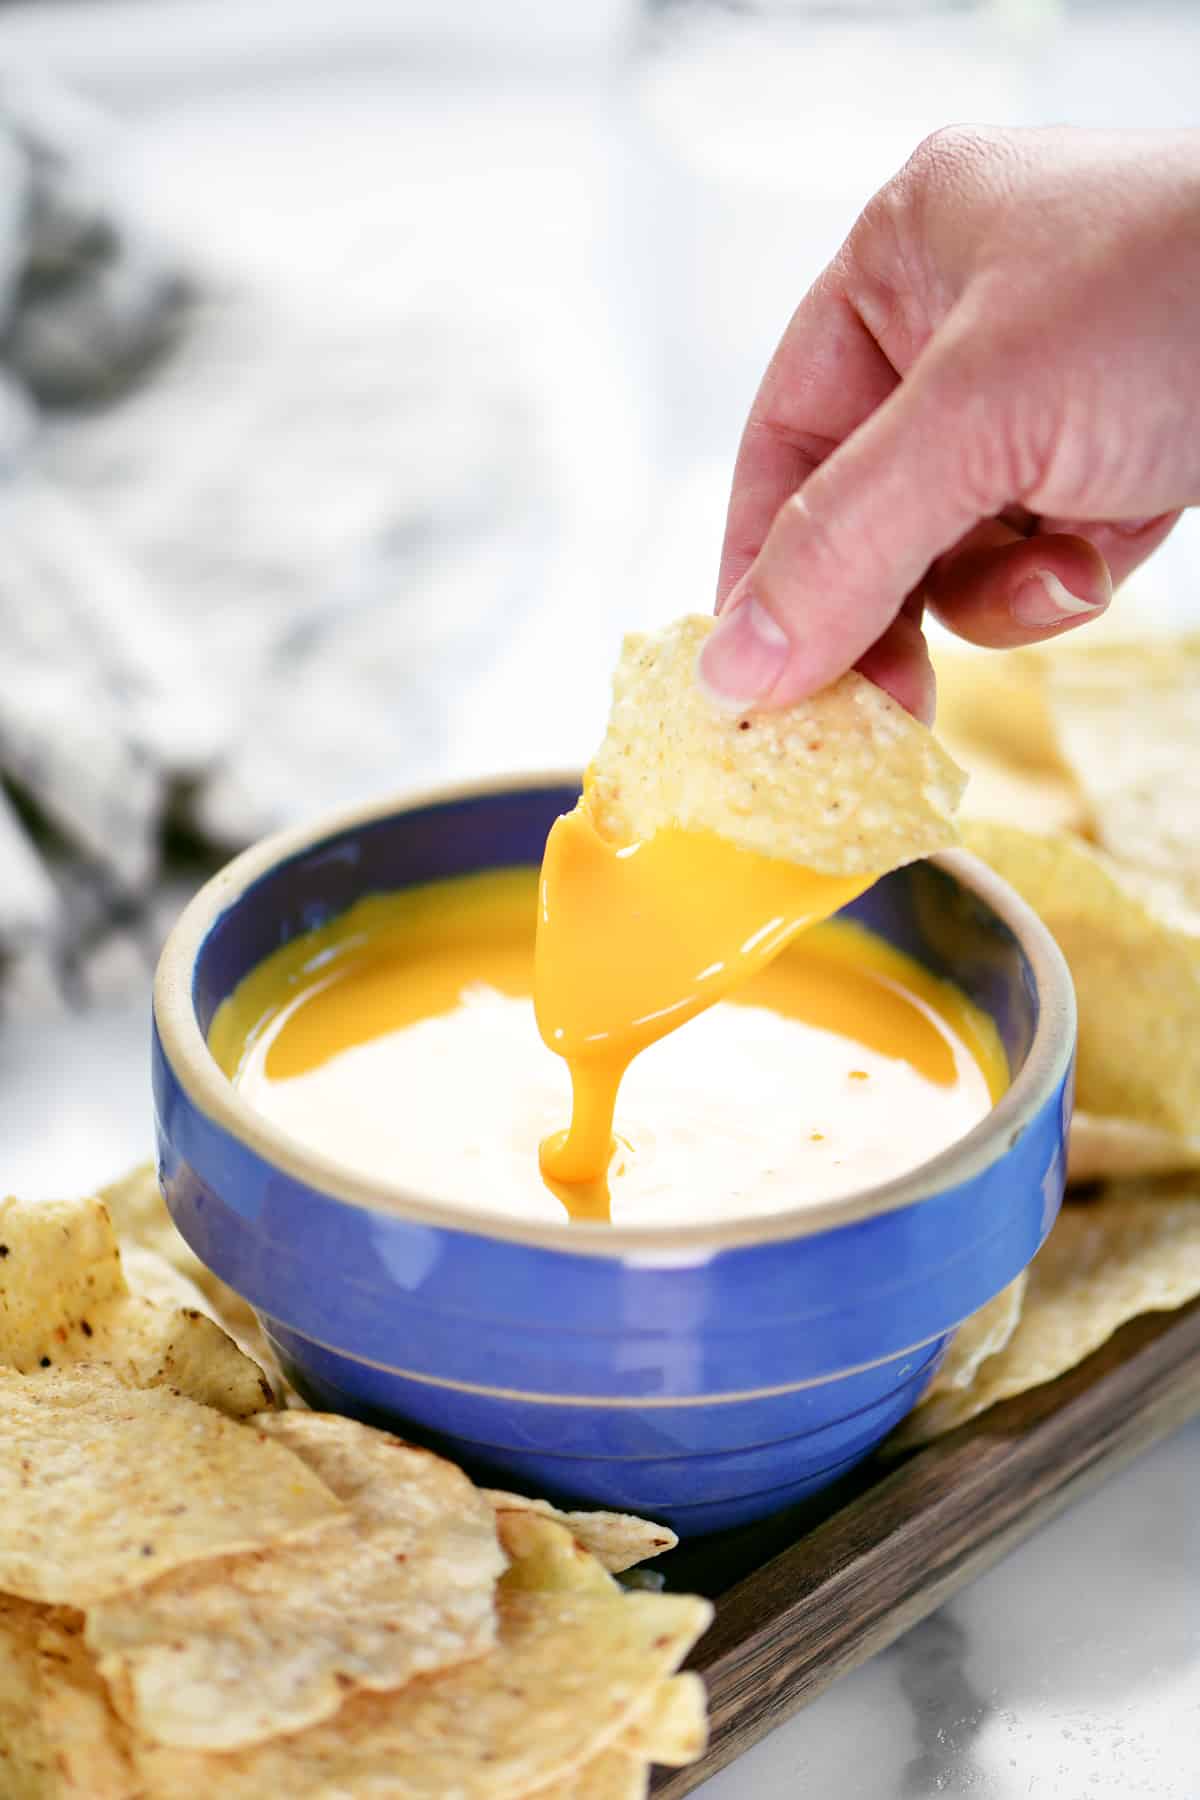 a hand using a chip to scoop up cheese dip from a blue bowl.